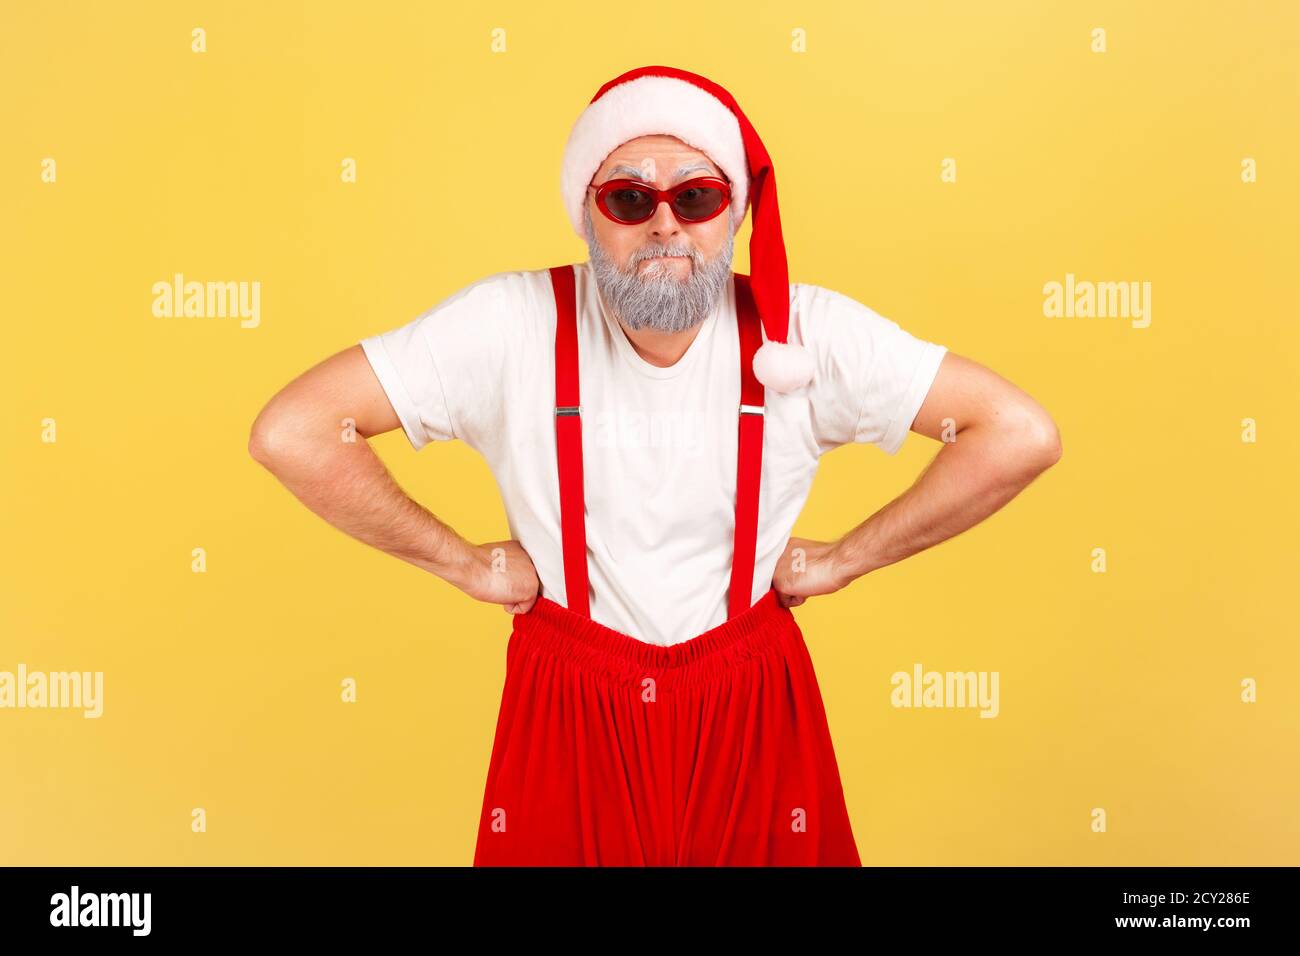 Funny adult man with grey beard in sunglasses, santa claus hat and pants with suspenders standing with arms akimbo. Indoor studio shot isolated on yel Stock Photo